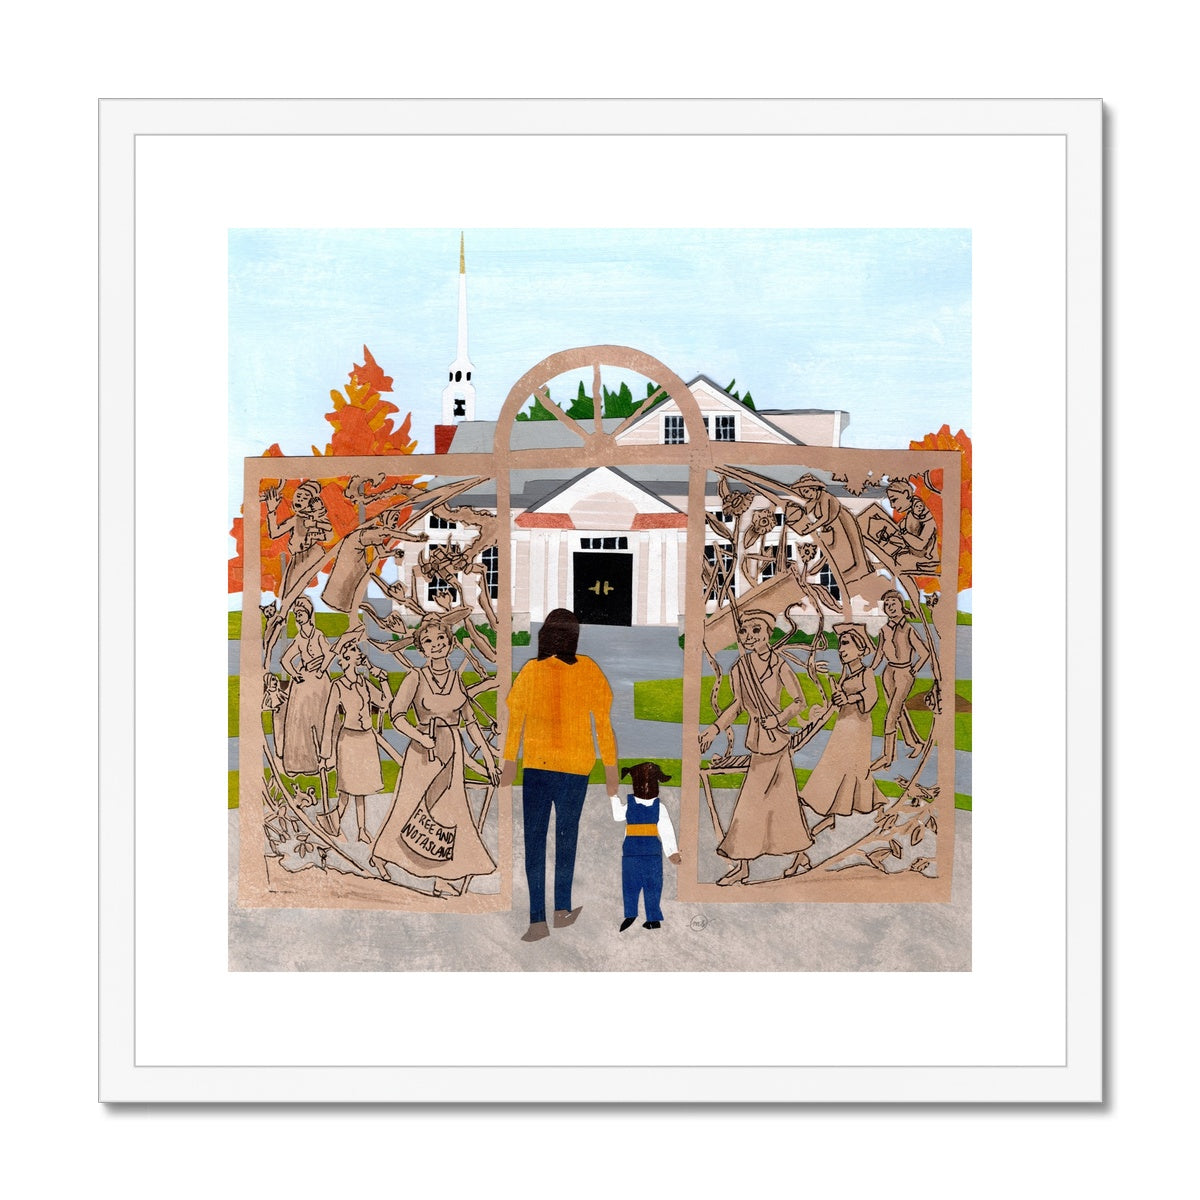 Her Town Too Framed & Matted Print